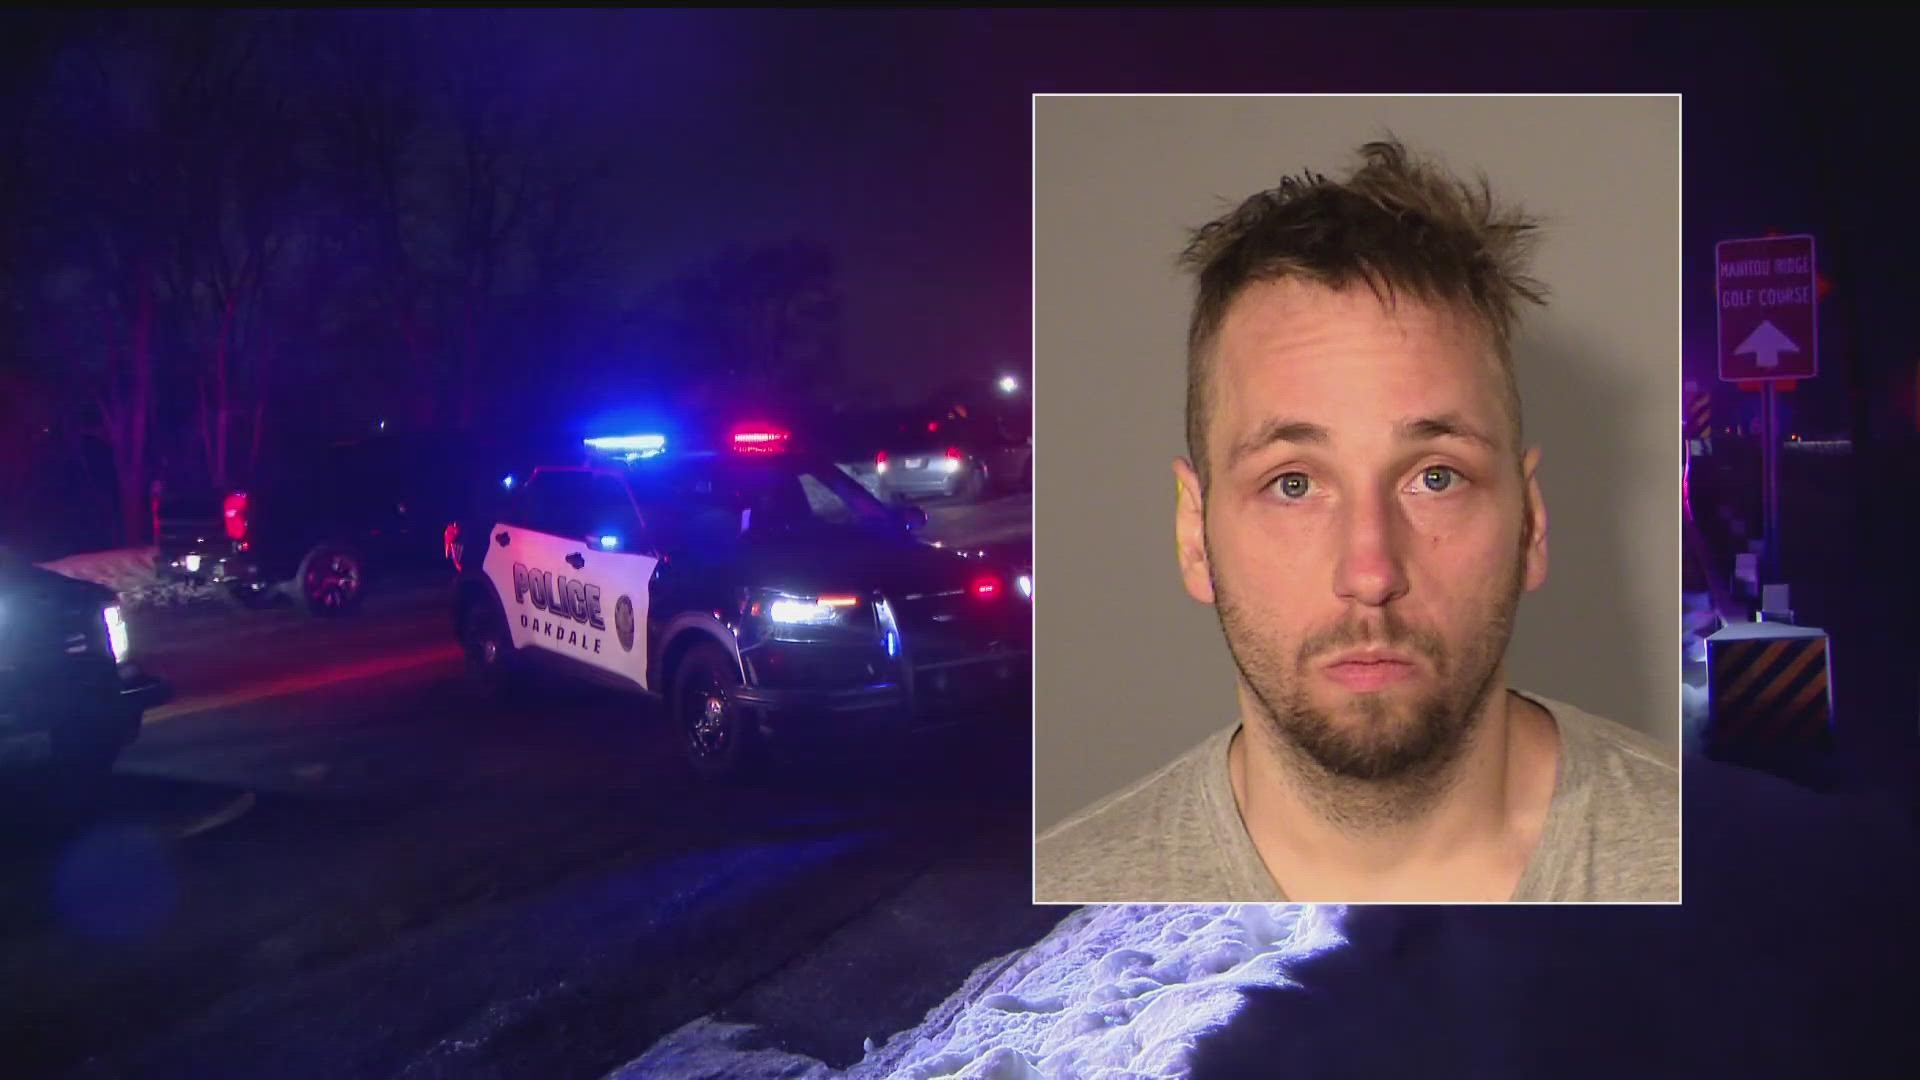 According to the criminal complaint, Daniel Loren Holmgren, Jr. fired "multiple times" at officers, striking one of them in the leg, stomach and pelvis.